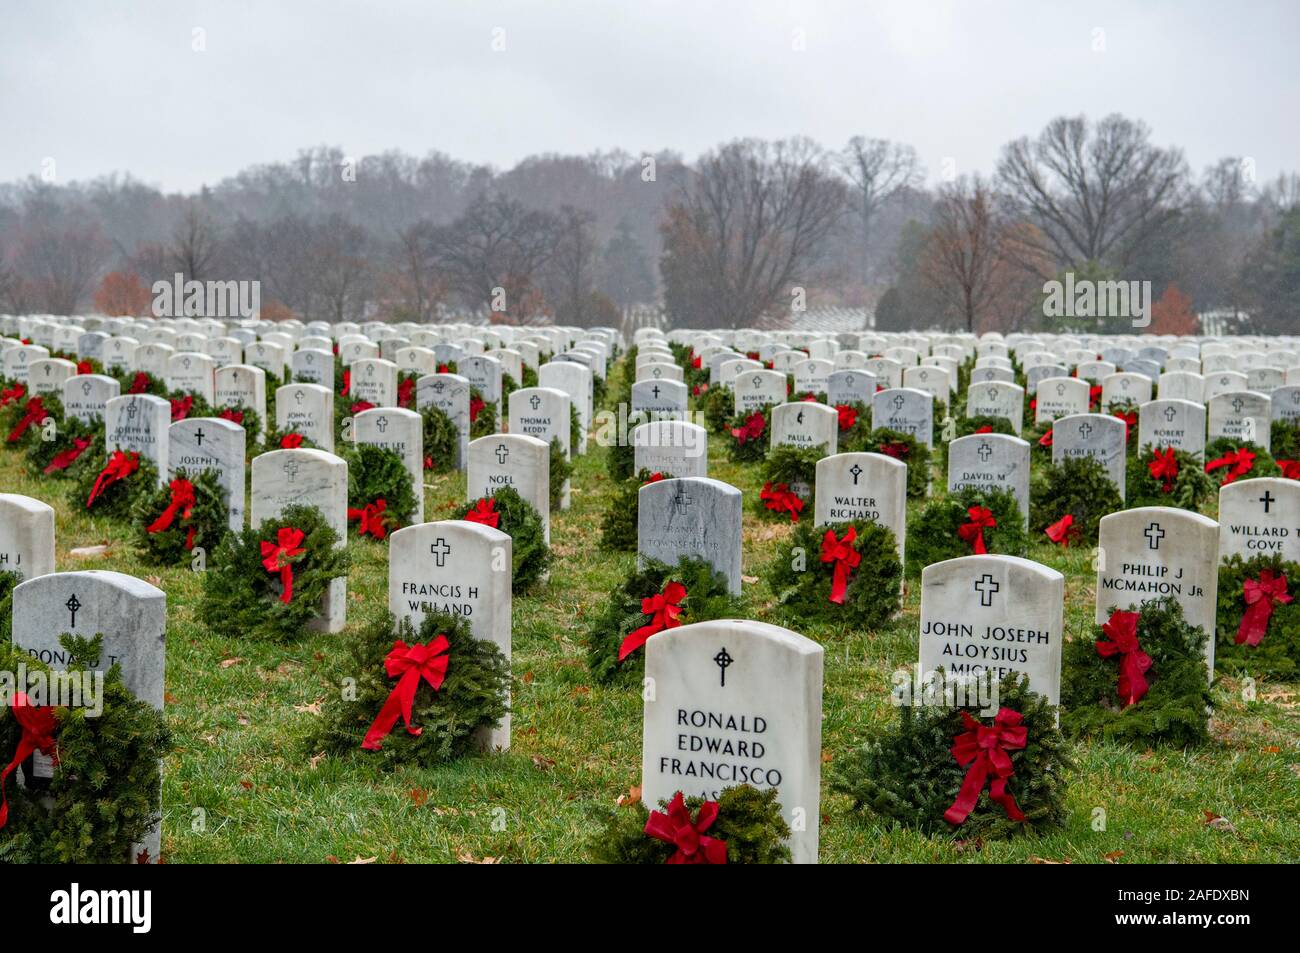 Arlington, United States of America. 14 December, 2019. Thousands of wreaths mark Section 54 on the gravesite of a fallen service member during the 28th Wreaths Across America Day at Arlington National Cemetery December 14, 2019 in Arlington, Virginia. More than 38,000 volunteers place wreaths at every gravesite at Arlington National Cemetery and other sites around the nation.  Credit: Elizabeth Fraser/DOD/Alamy Live News Stock Photo